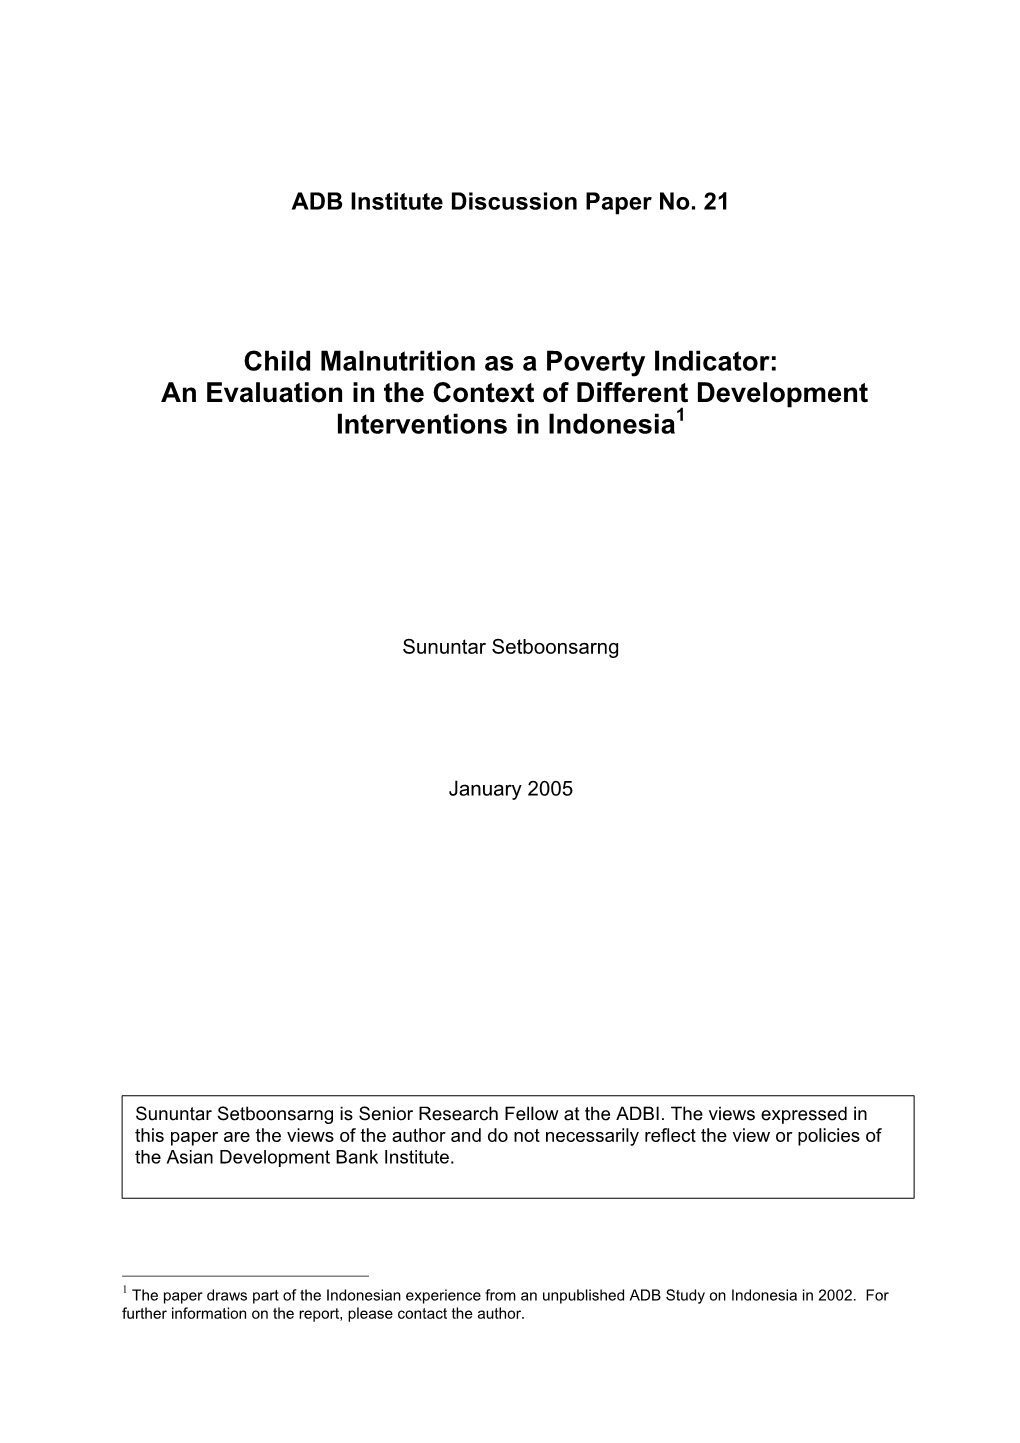 Child Malnutrition As a Poverty Indicator: an Evaluation in the Context of Different Development Interventions in Indonesia1